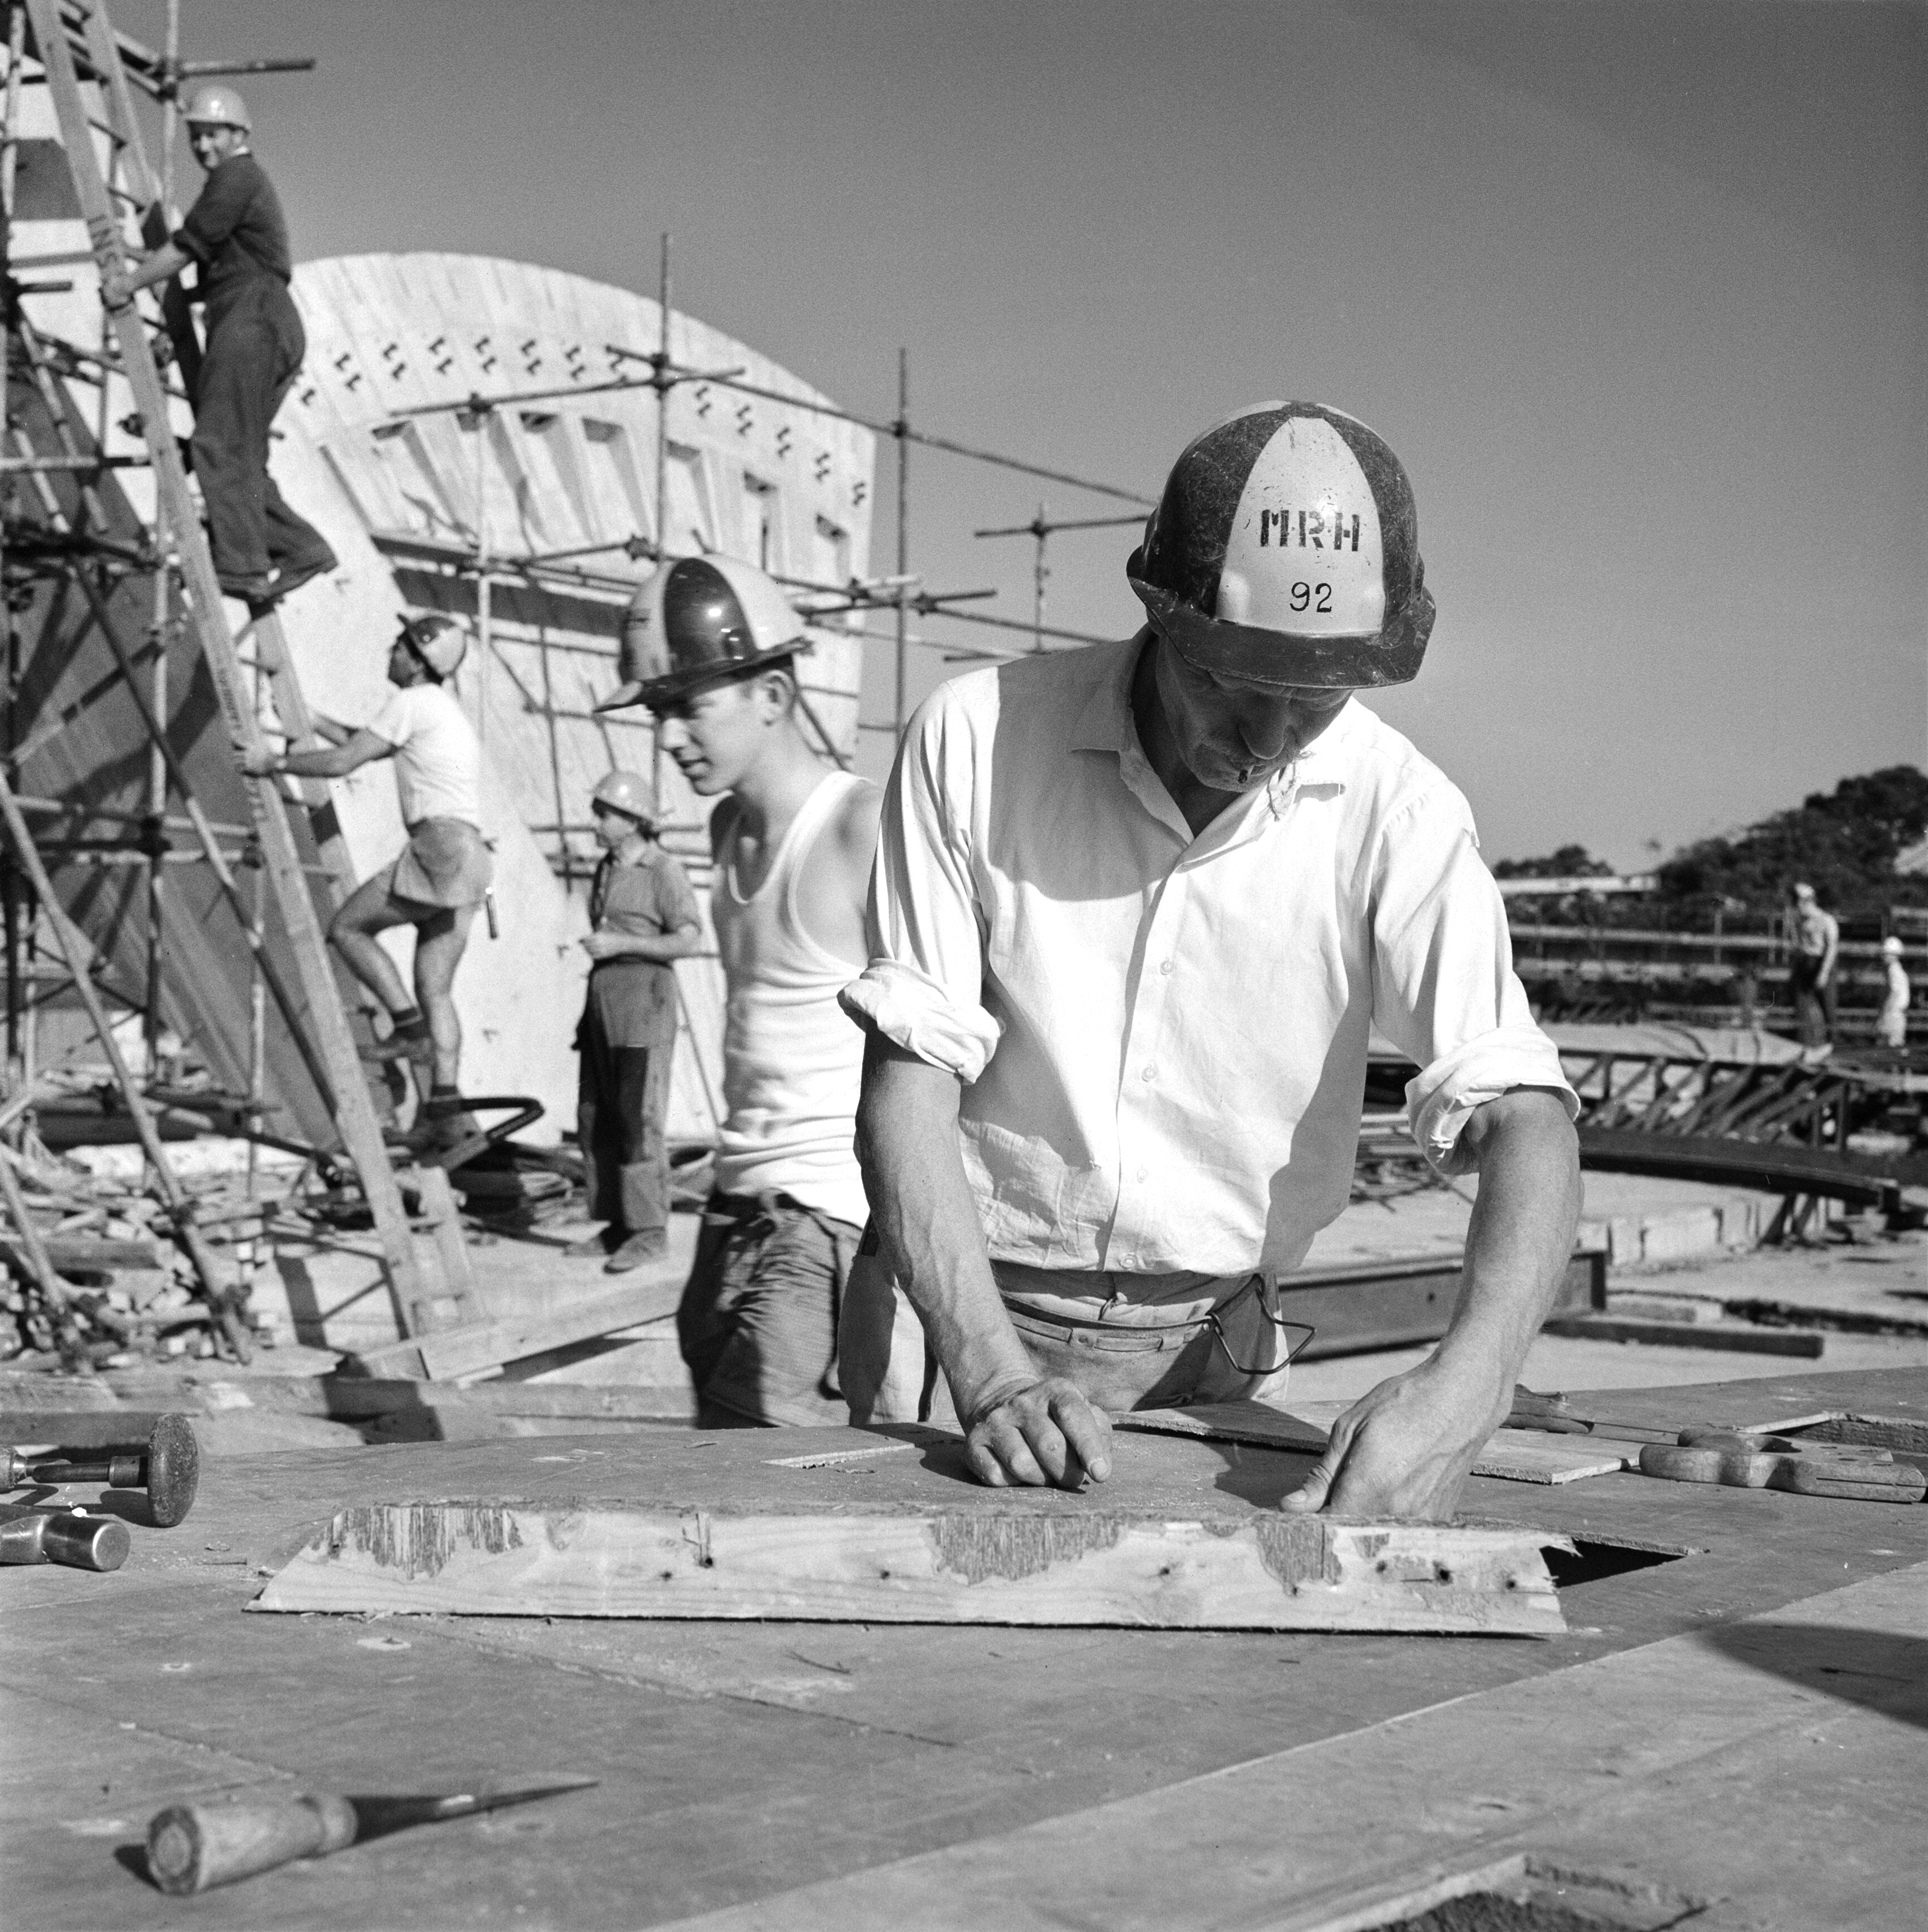 A group of five people in hard hats working on the construction site of the Sydney Opera House.